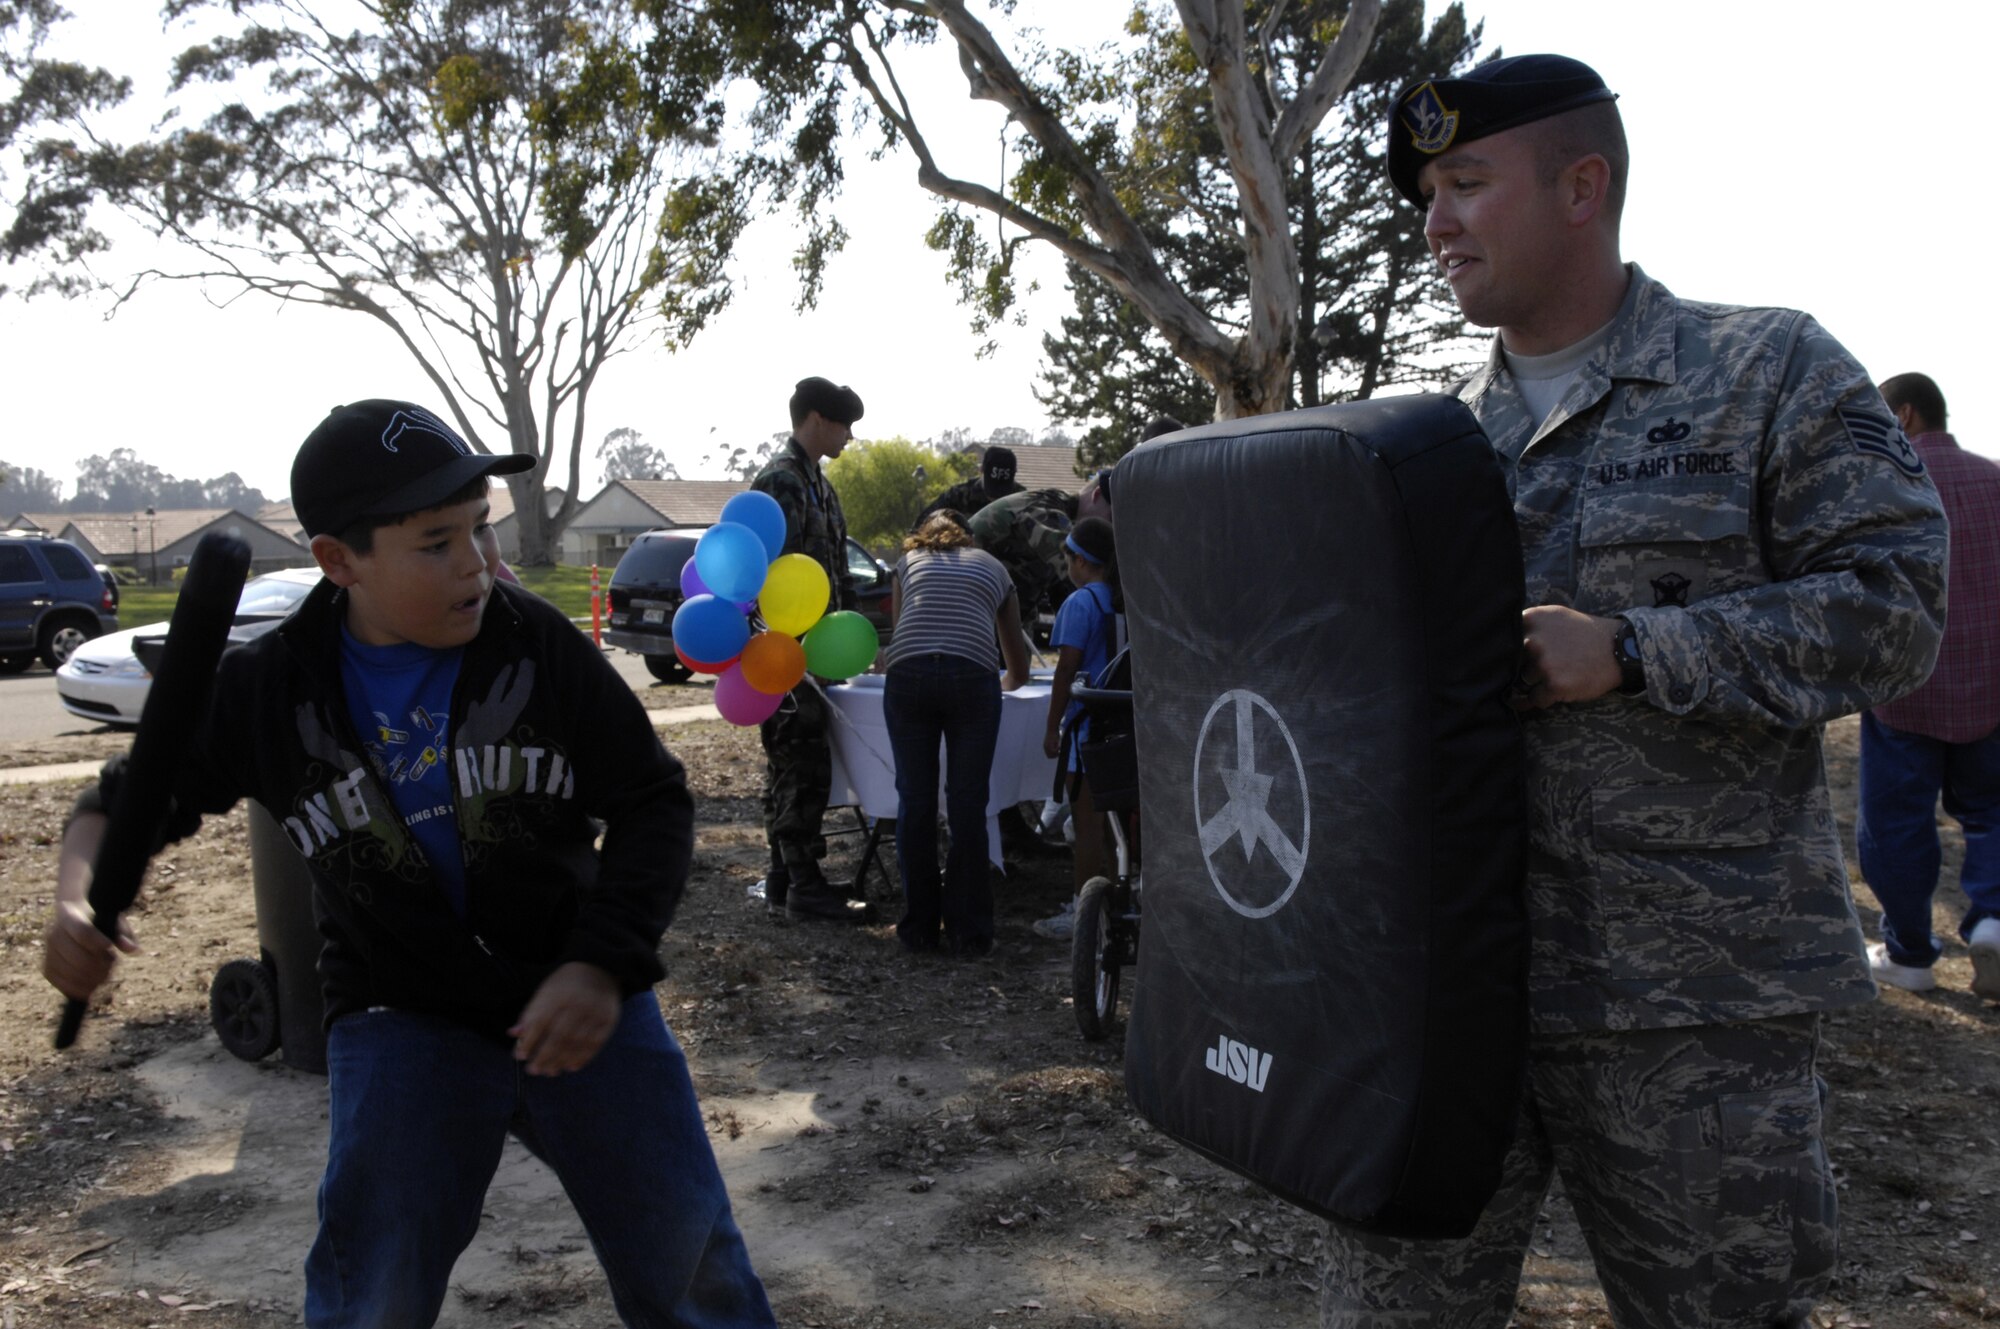 VANDENBERG AIR FORCE BASE, Calif. -- Caleb Leduc, a 10-year-old resident of Vandenberg, swings at a pad held by Staff Sgt. Michael Myers, 30th Security Forces Squadron, during the National Night Out on Aug.10.  National Night Out is an event designed to increase children's awareness of safety. (U.S. Air Force photo/Airman Jonathan Olds)